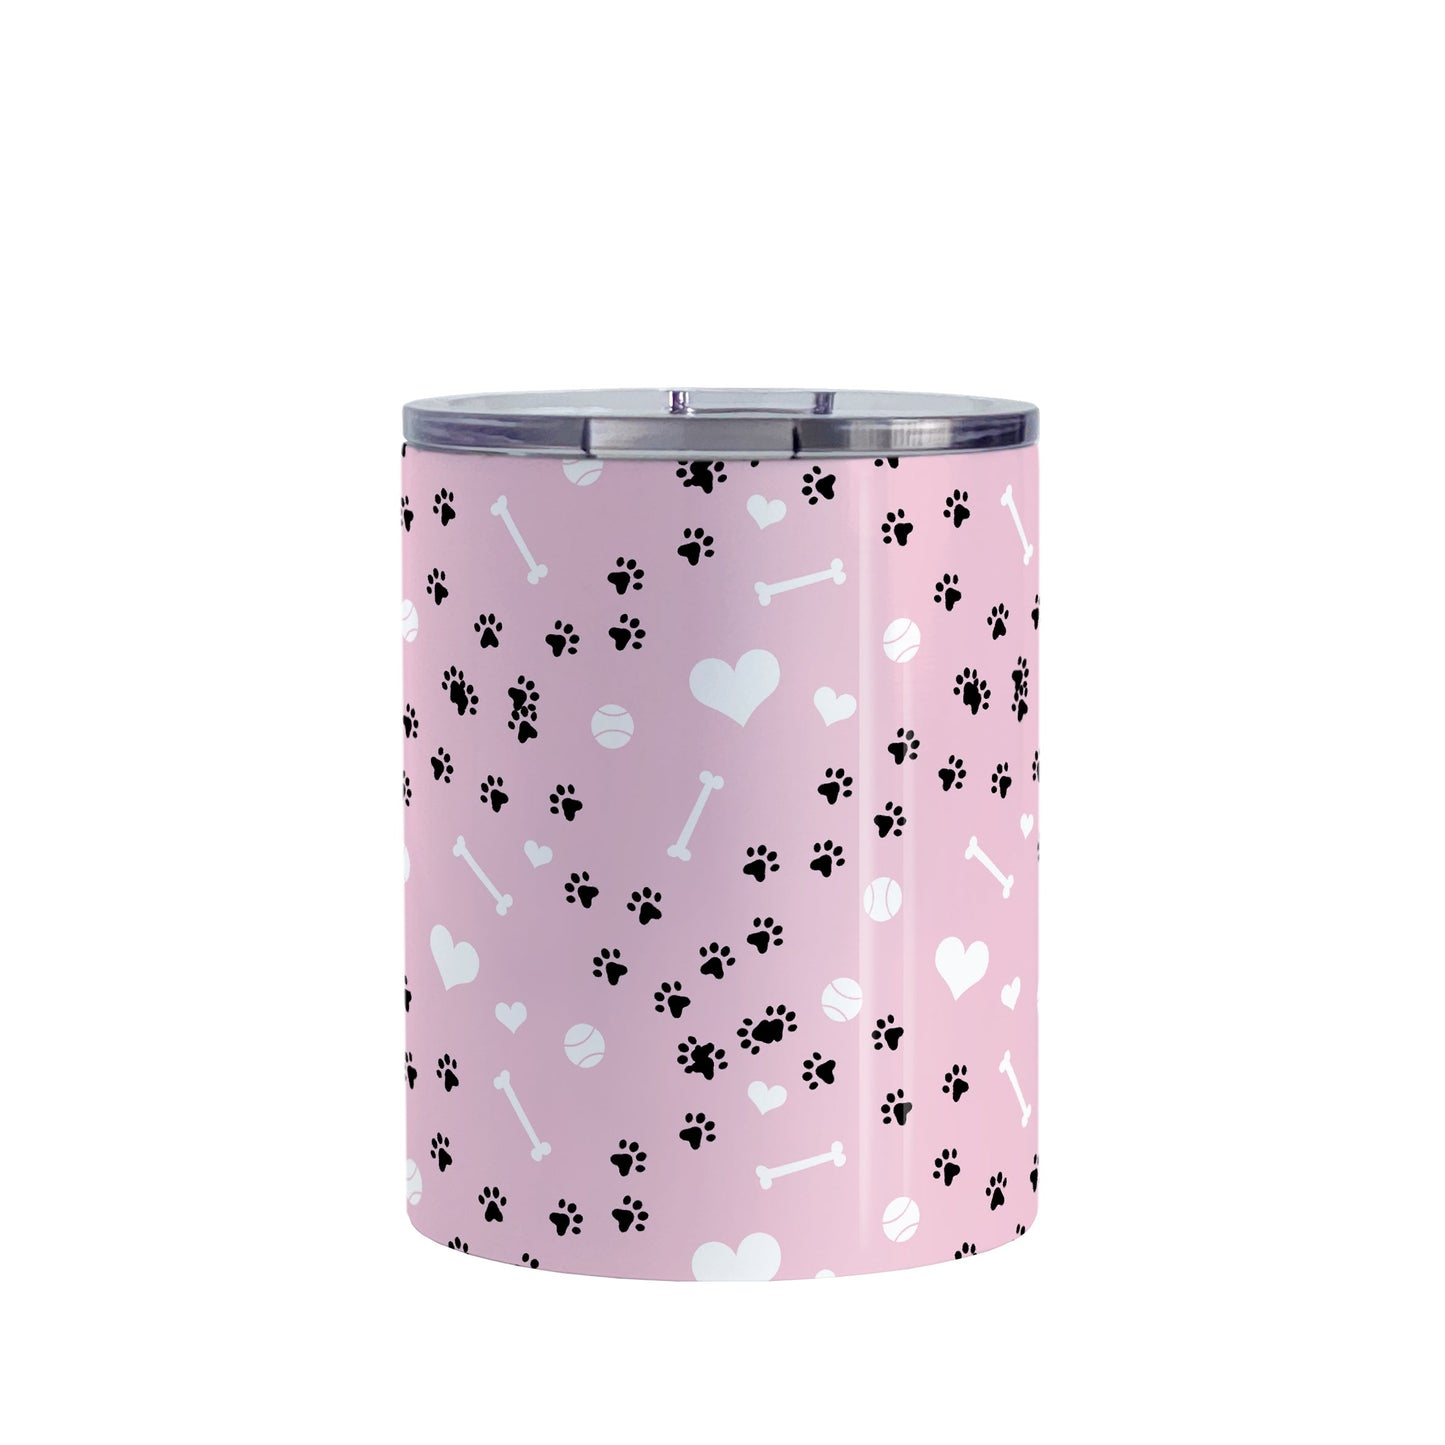 Puppy Run Pink Dog Tumbler Cup (10oz) at Amy's Coffee Mugs. A stainless steel insulated tumbler cup designed with a pattern of chaotic tracks of puppy paw prints running around the cup with white dog bones, playing balls, and hearts over a light pink background that wraps around the cup. This cup is perfect for people who love puppy dogs, cute paw print designs, and the color pink. 